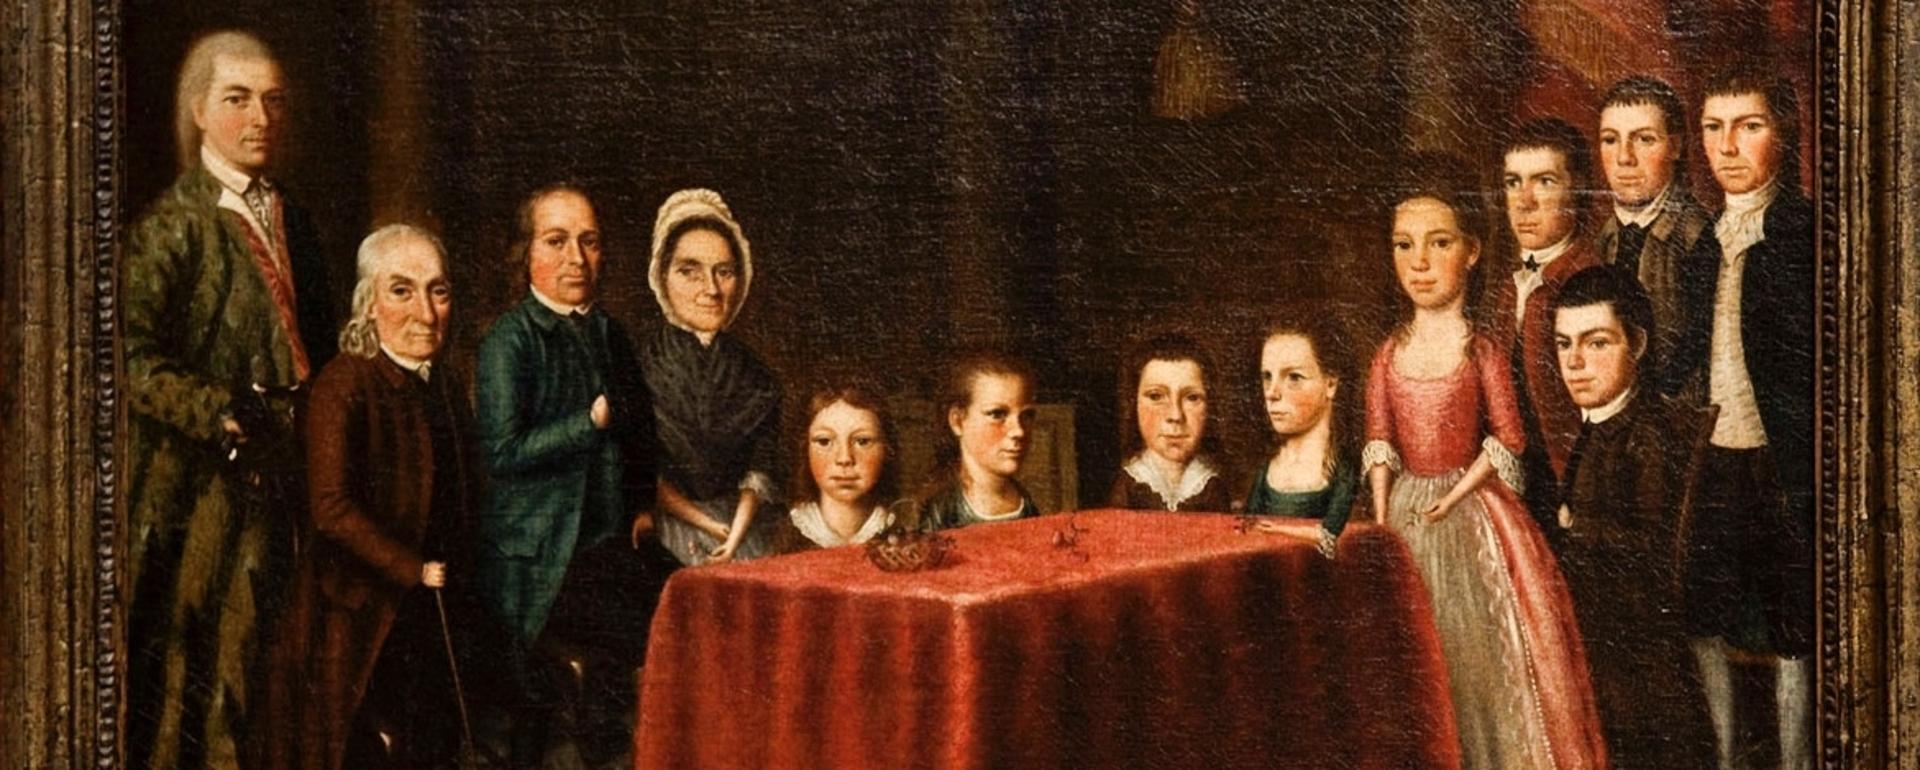 The Savage Family - by Edward Savage (1779)